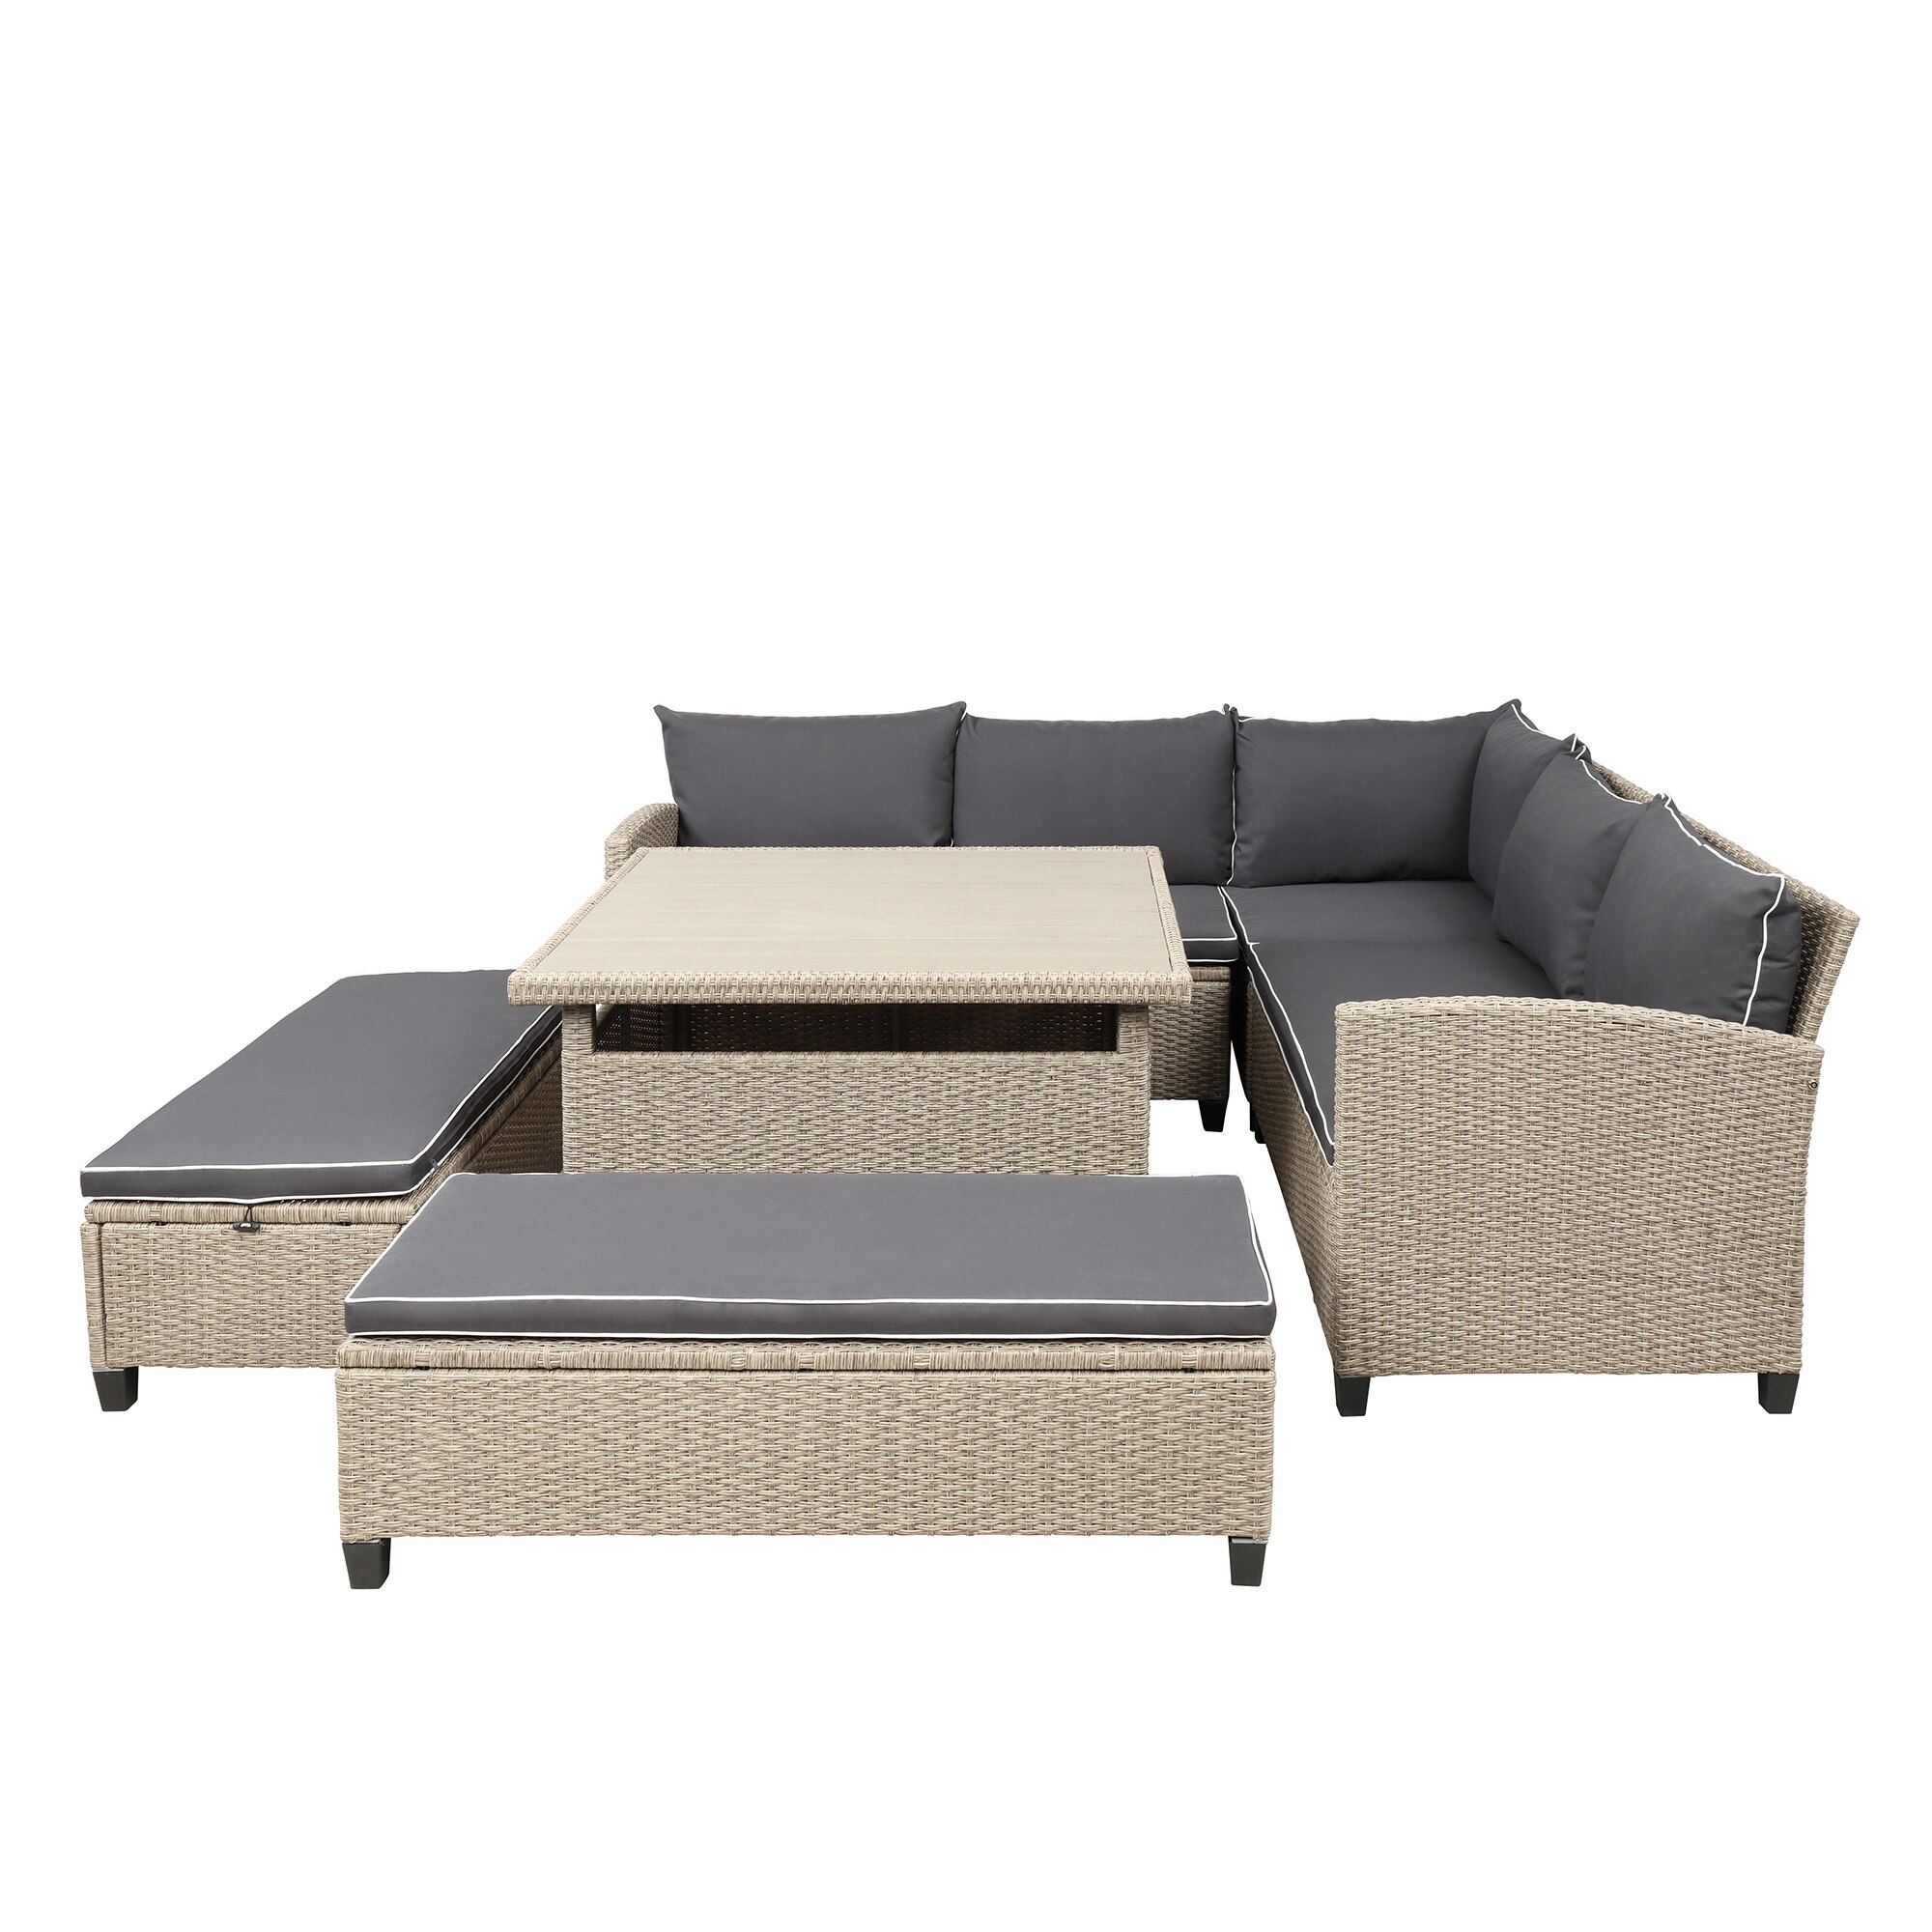 6-Piece Patio Furniture Set Outdoor Wicker Rattan Sectional Sofa With Table And Benches For Backyard Garden Poolside 2